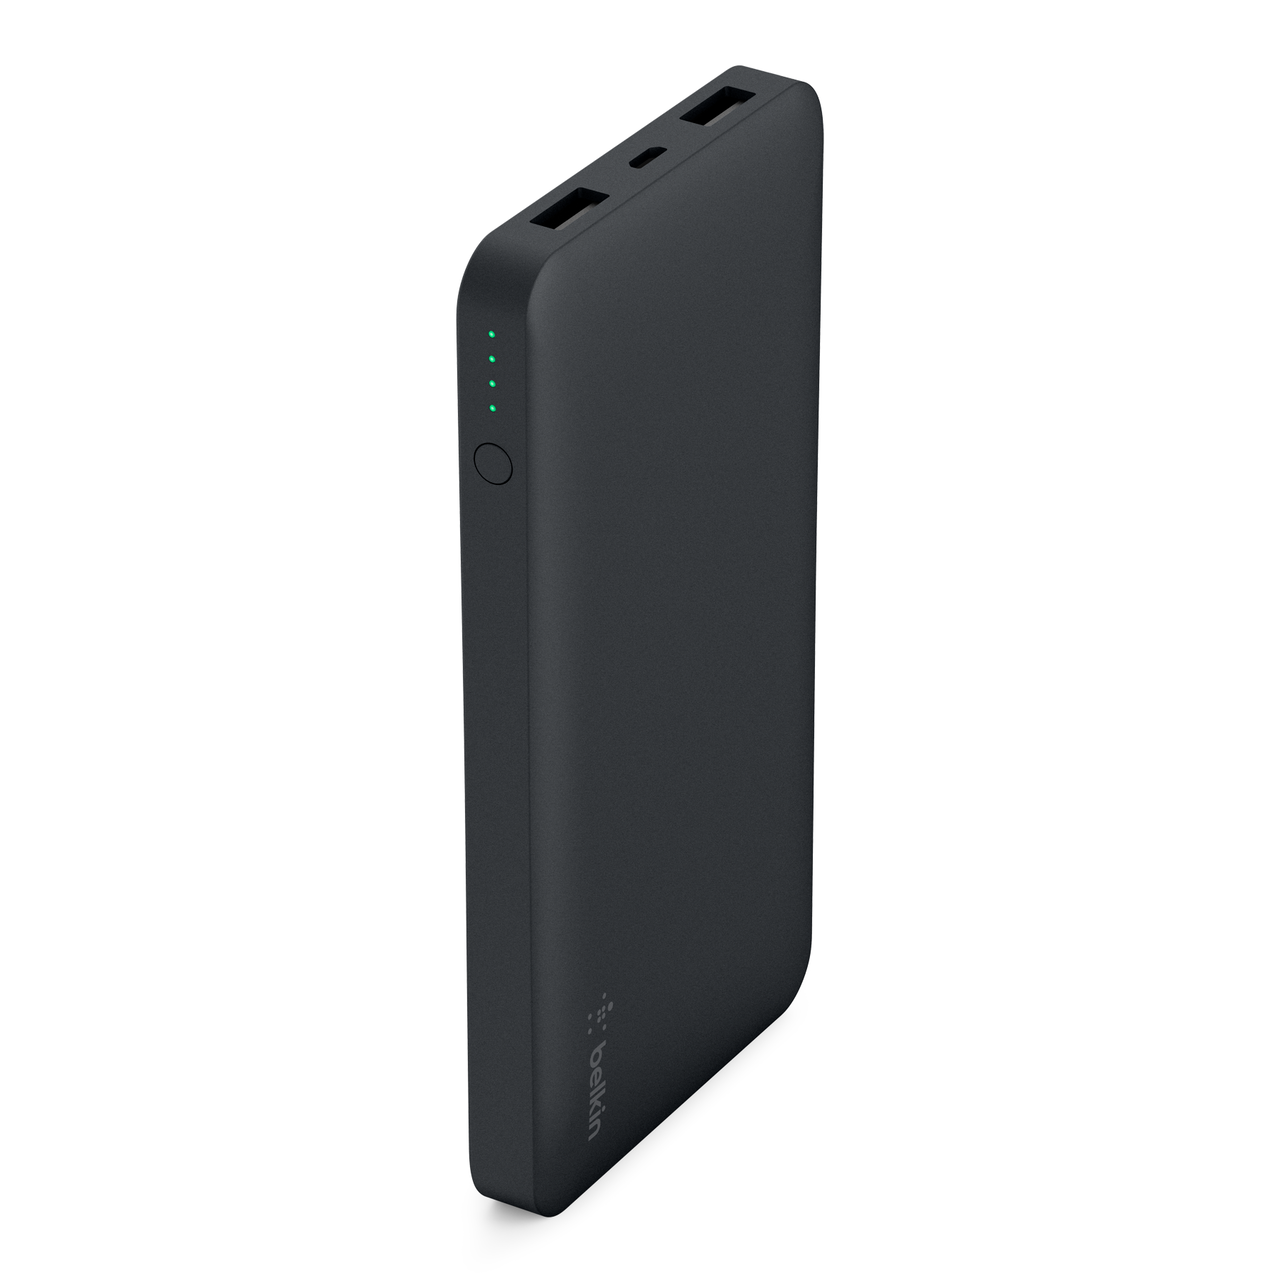  Belkin Pocket Power 10K Power Bank (Portable Charger for  iPhone, Samsung Galaxy, Google Pixel 3 , Apple Watch and more), Black,  10,000mAh (F7U020btBLK) : Cell Phones & Accessories